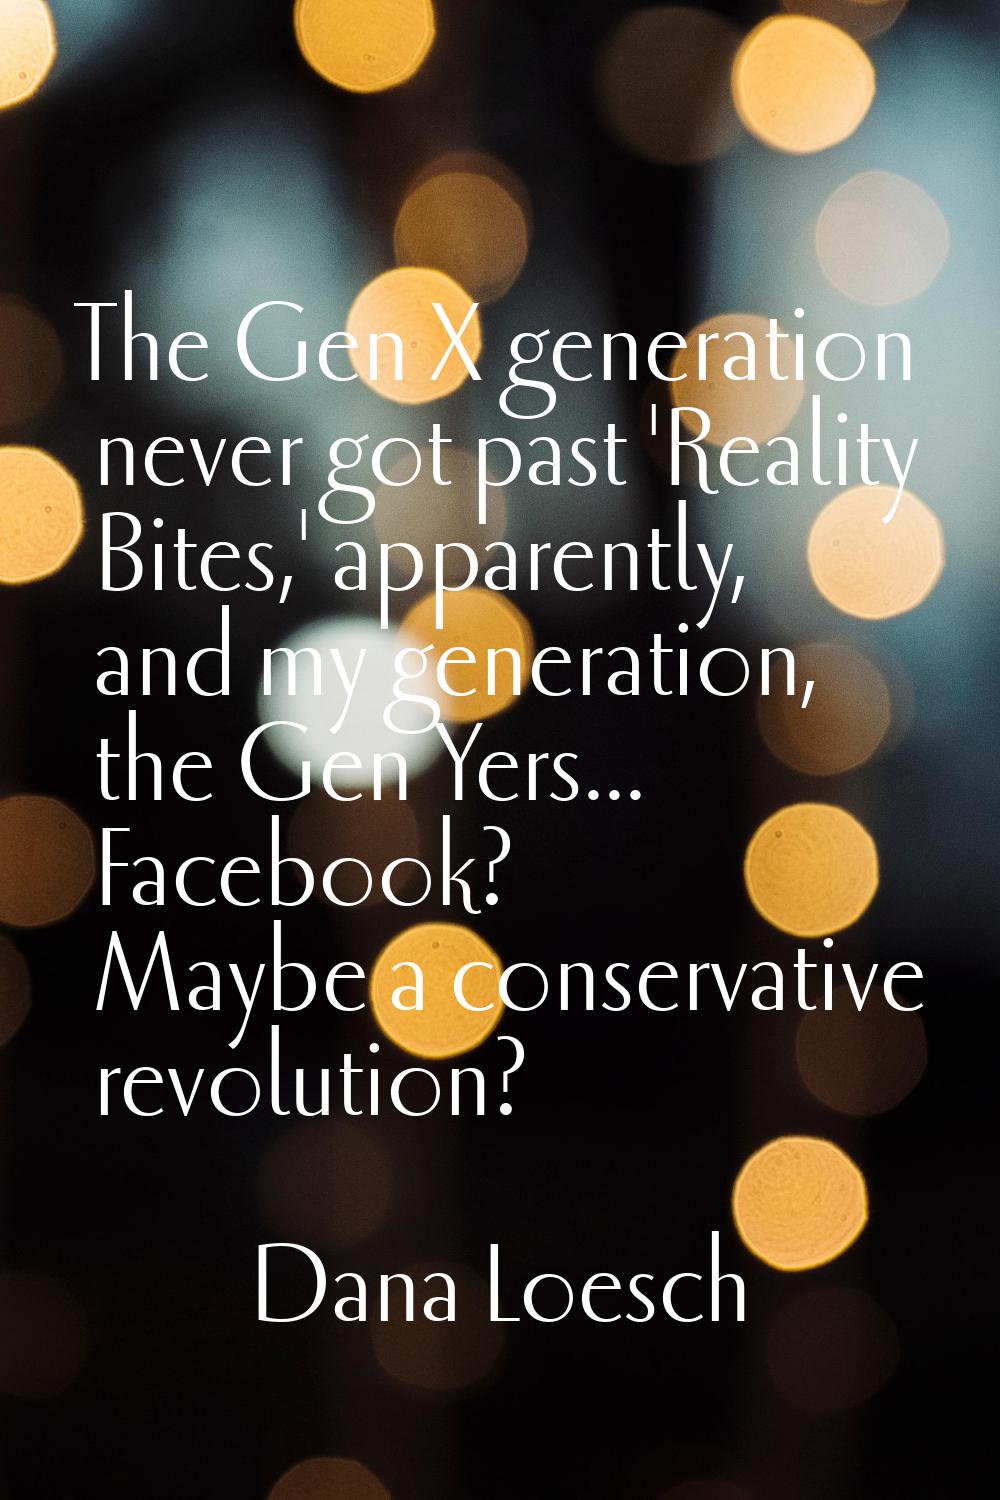 The Gen X generation never got past 'Reality Bites,' apparently, and my generation, the Gen Yers...